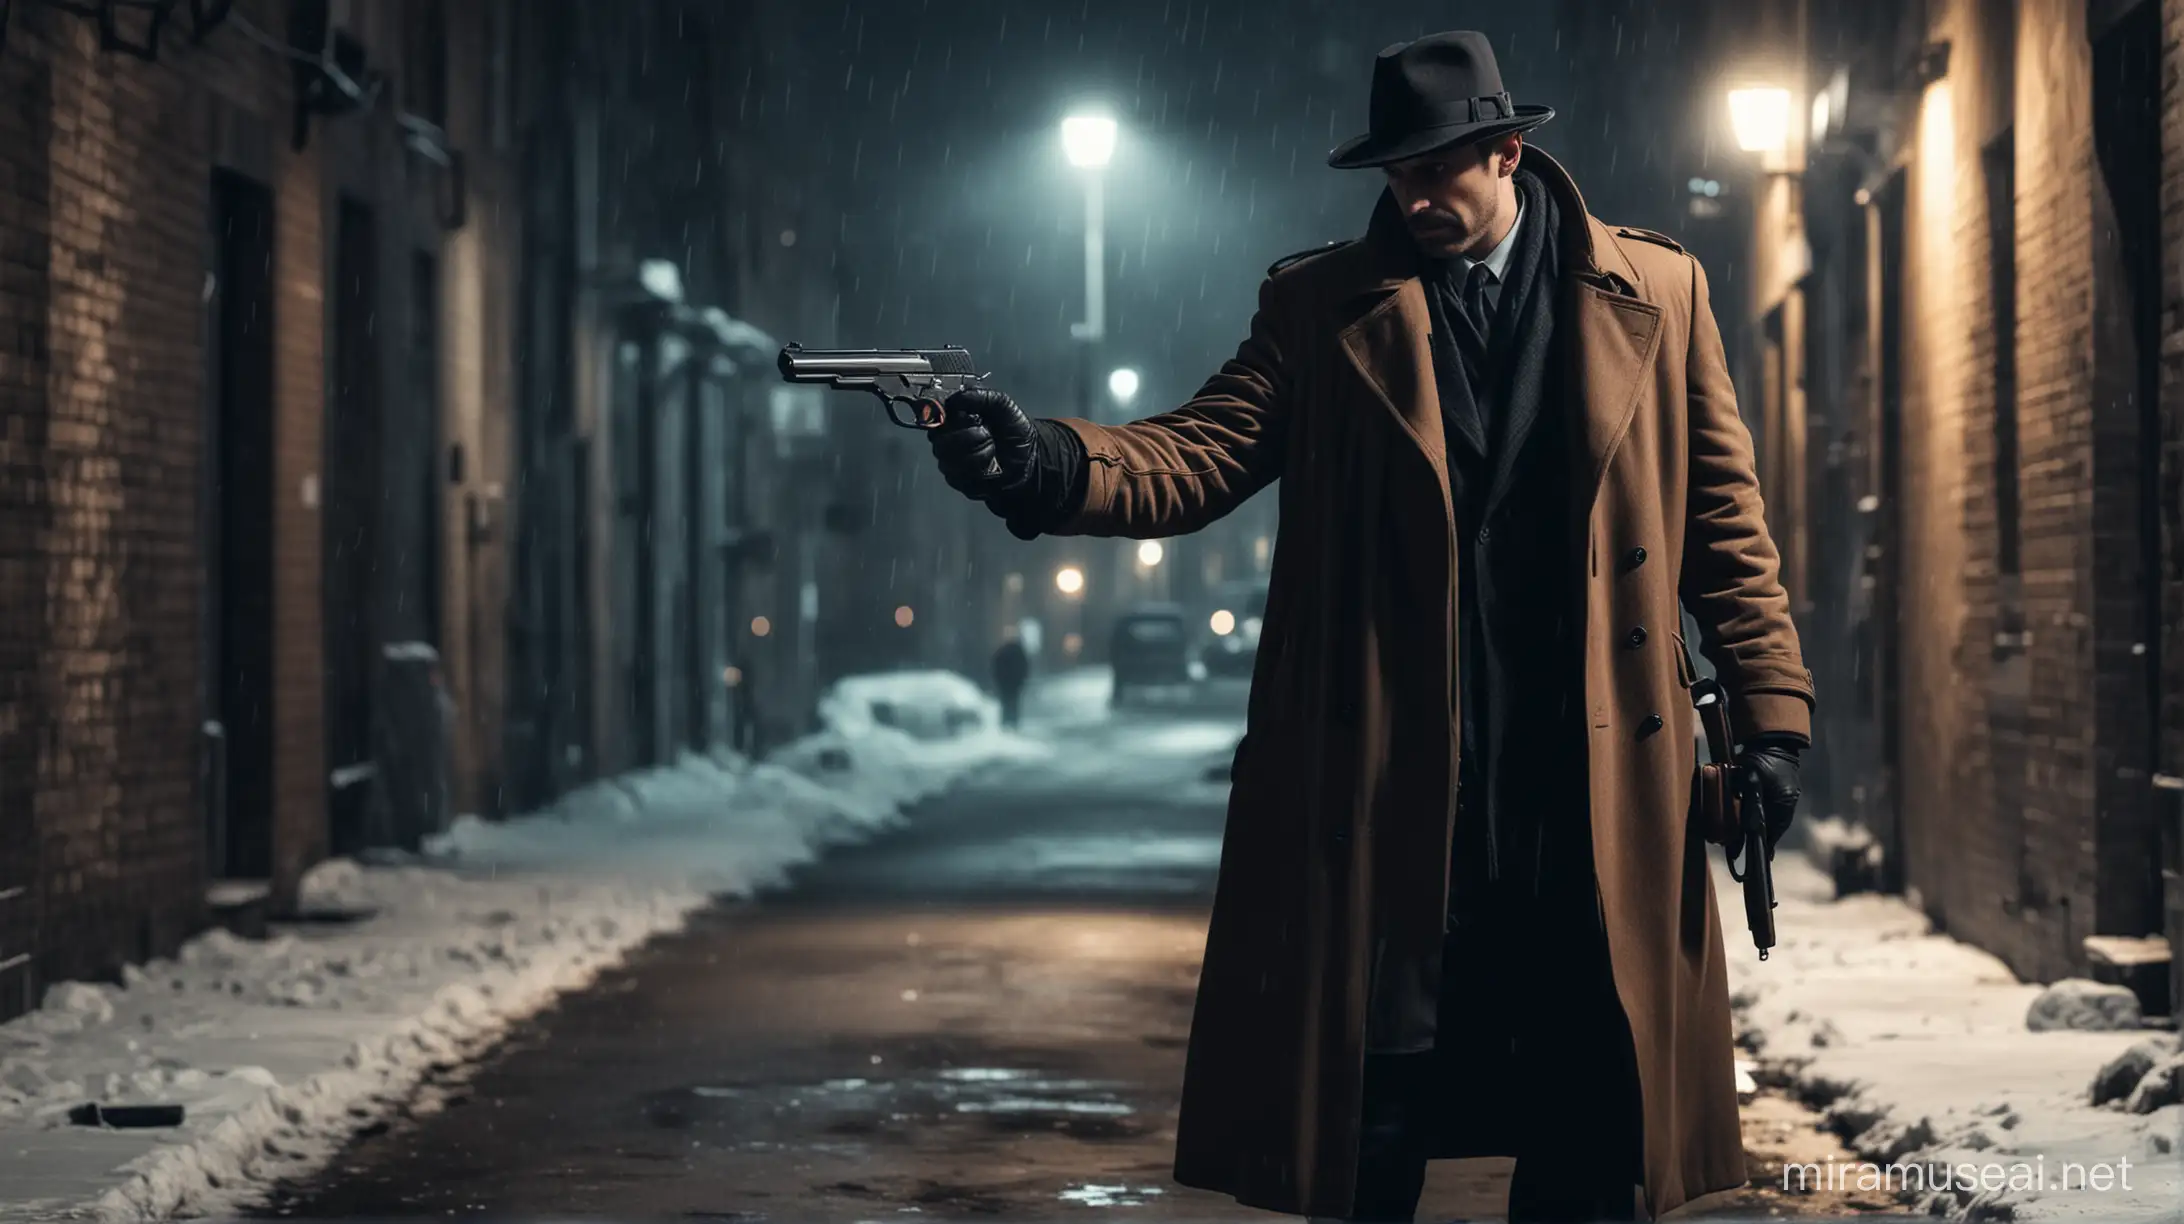 detective with a coat and a gun in his hand at winter night in an alley of the city at night where a murder with blood occurred